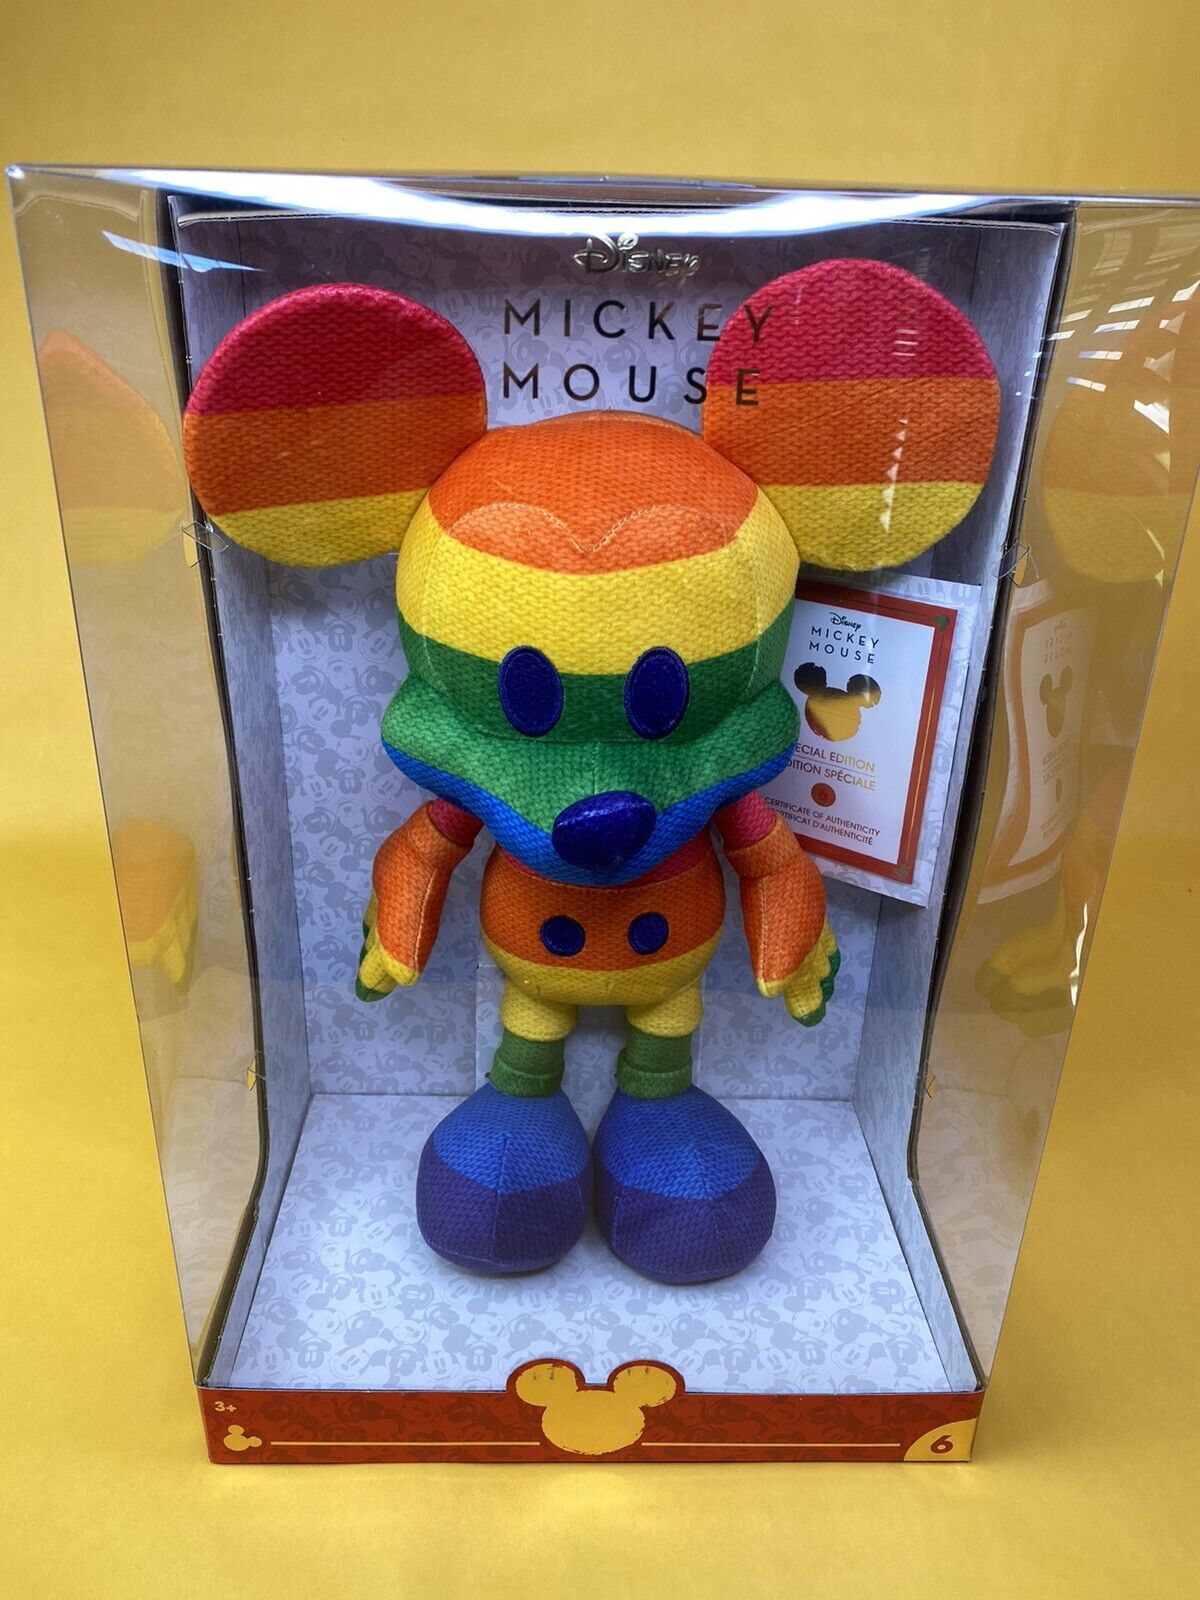 Disney Limited Edition Rainbow Mickey Mouse Plush June 2020 Collectible 16” 